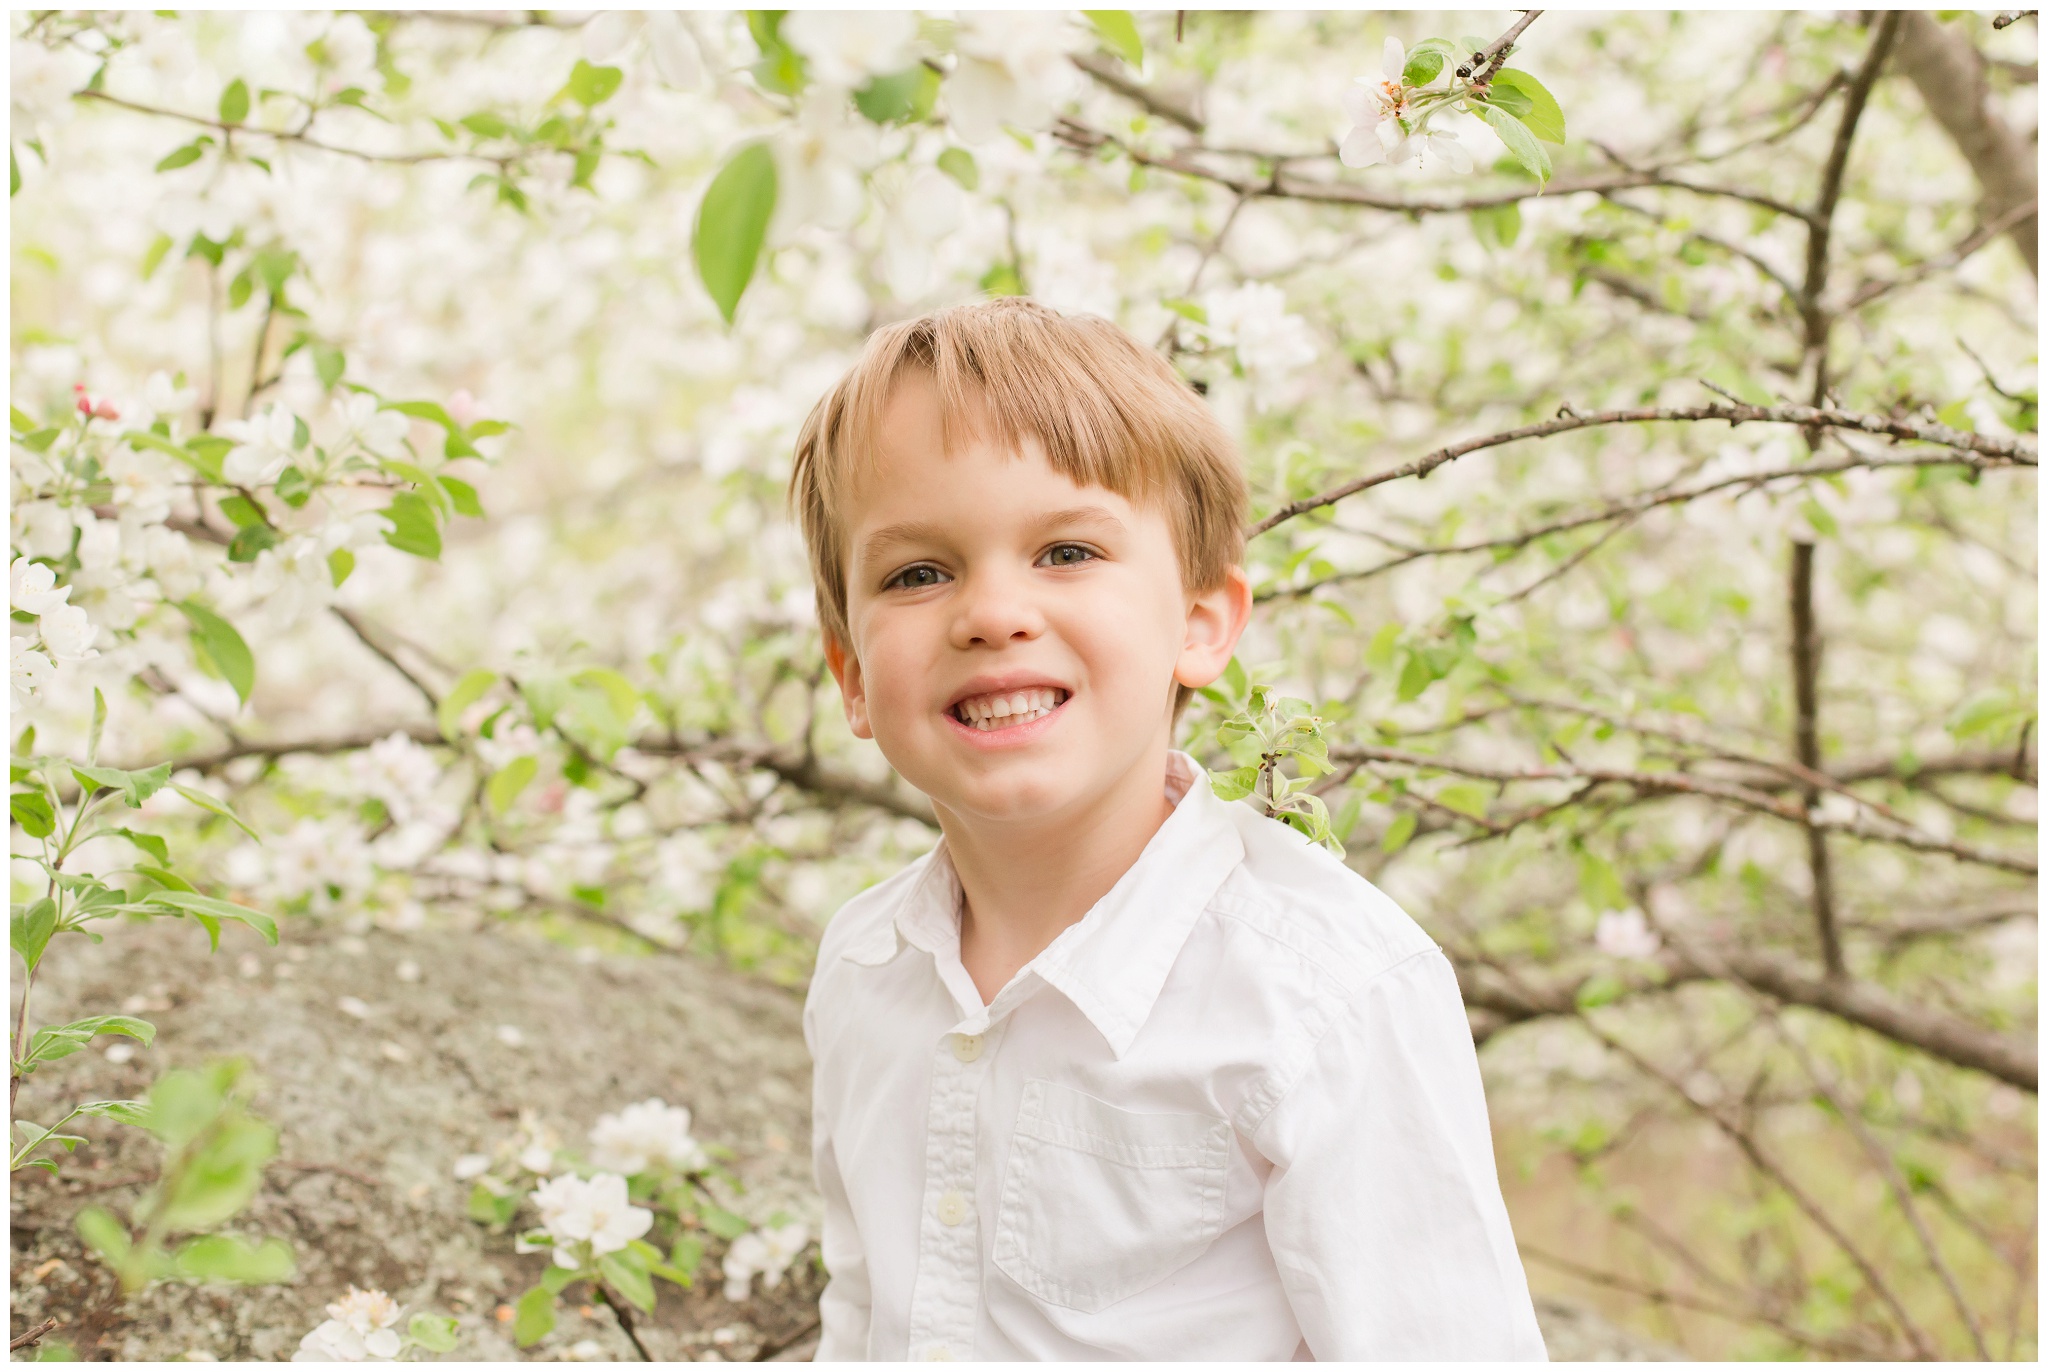 New Hampshire Wedding Photographer | Apple Blossoms | Epping, NH 